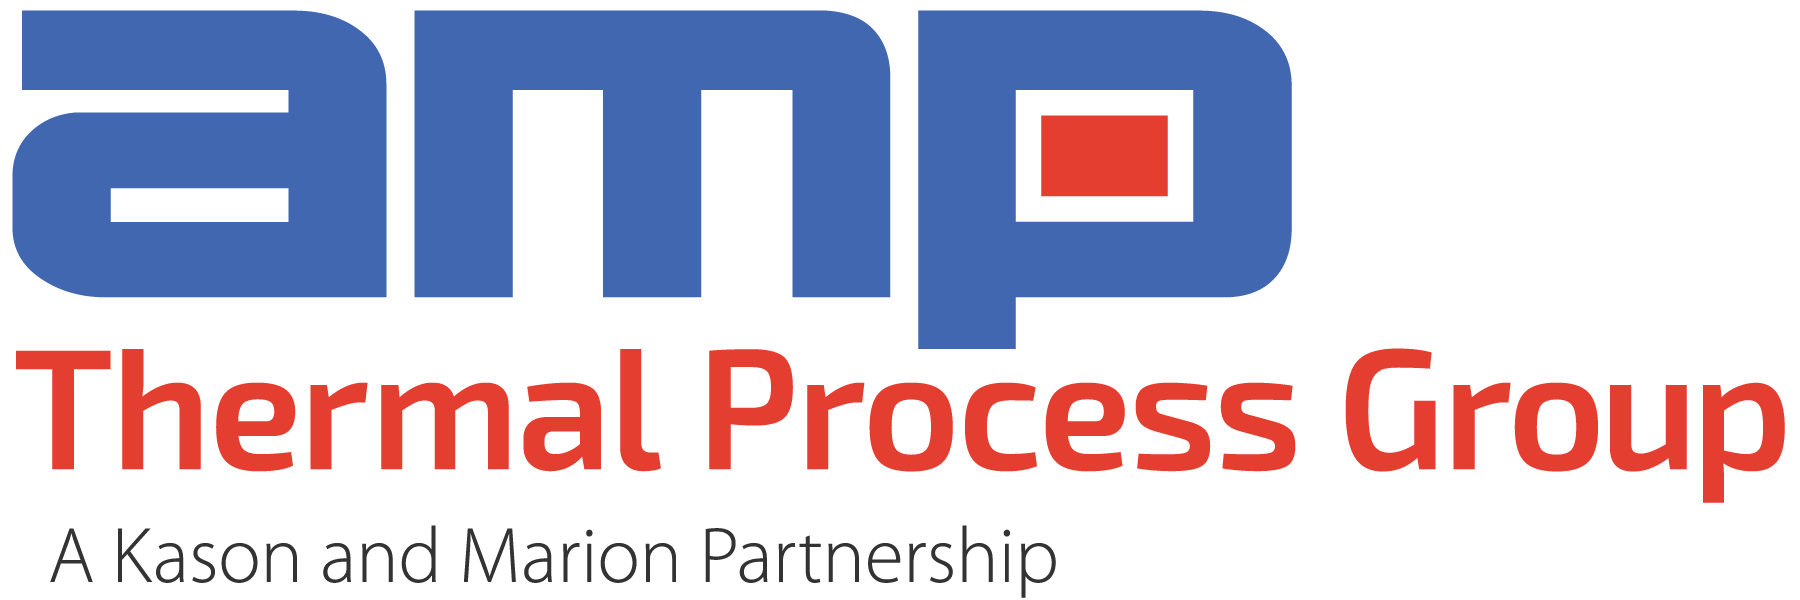 ADVANCED MATERIAL PROCESSING ANNOUNCES NEW DIVISION